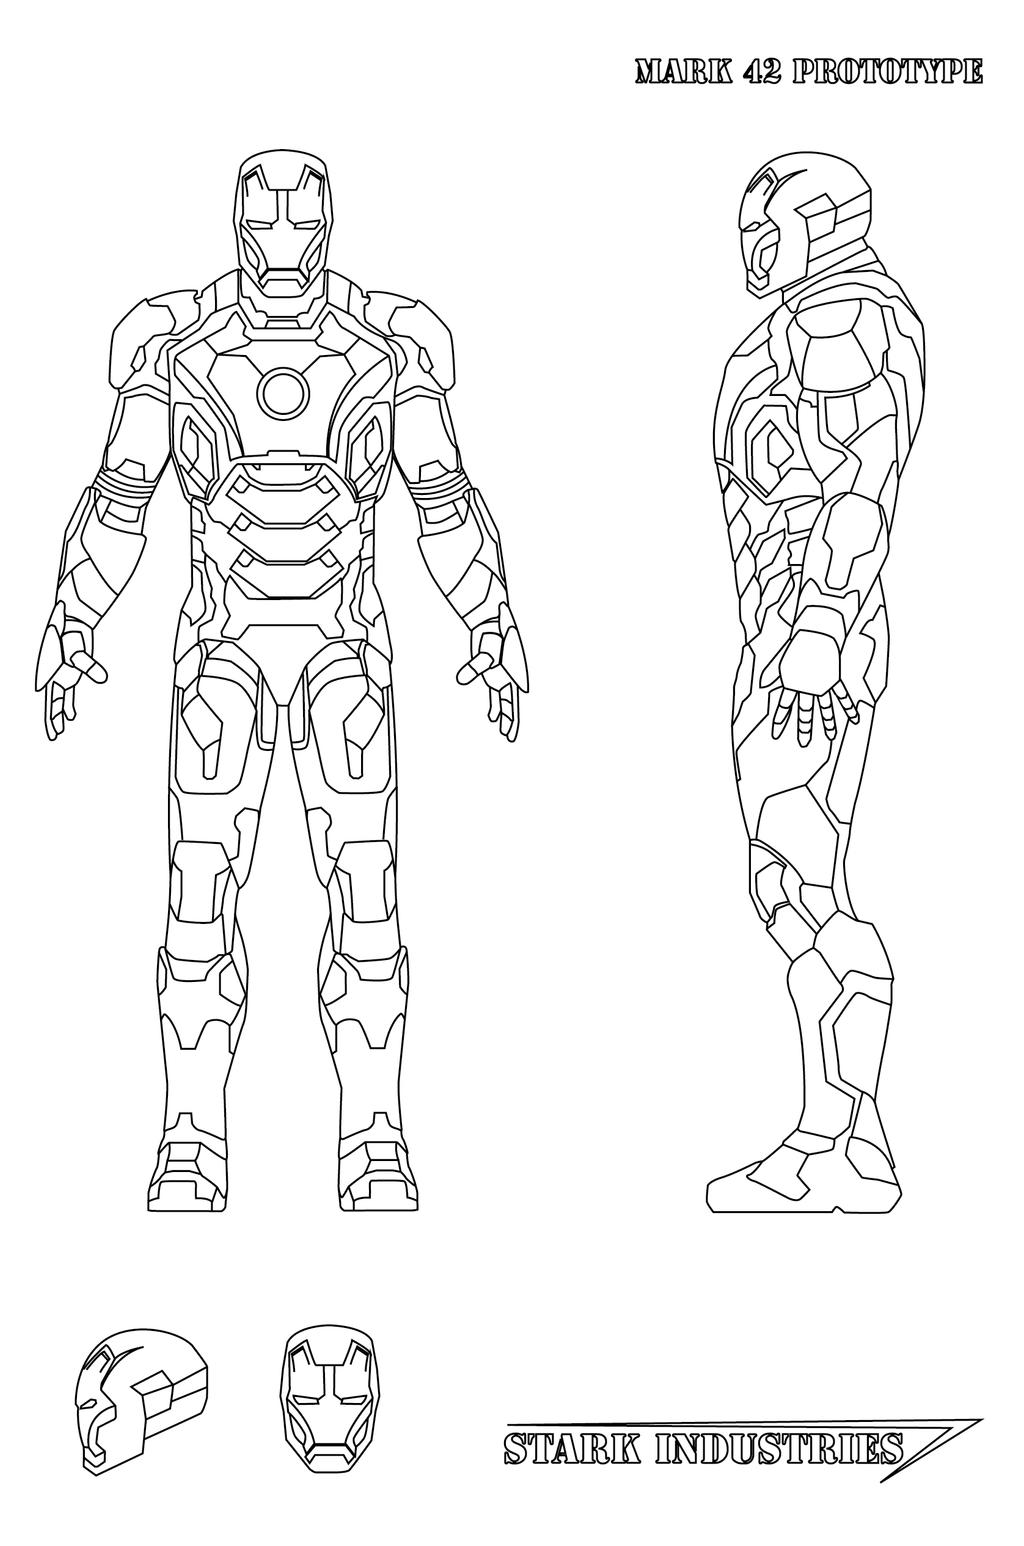 Iron Man Mark 7 Pages Coloring Pages